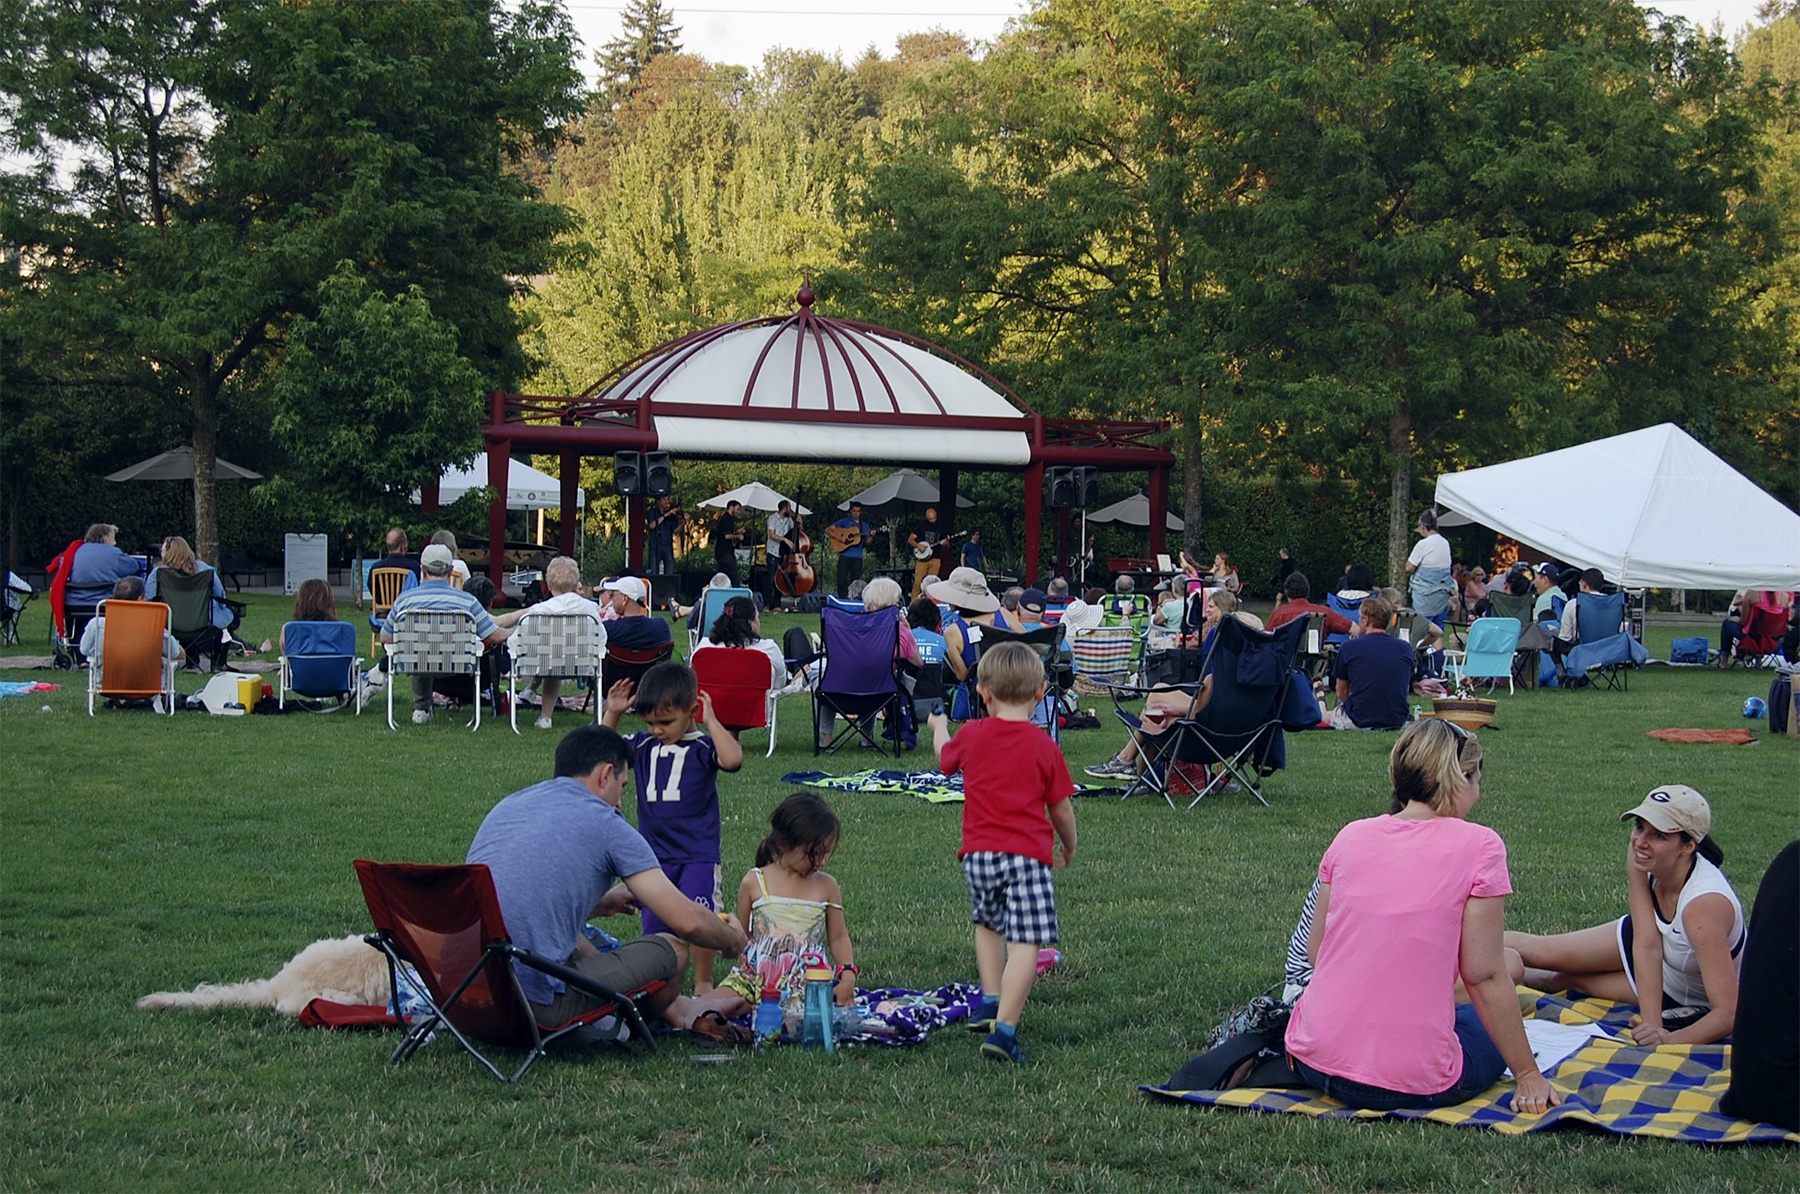 There are two upcoming concerts in Mercerdale Park: the Arts Council's Mostly Music featuring Swamp Soul on Thursday and MIPA's summer concert with Jen Ayers and The Parkway Boys on Tuesday. File photo.